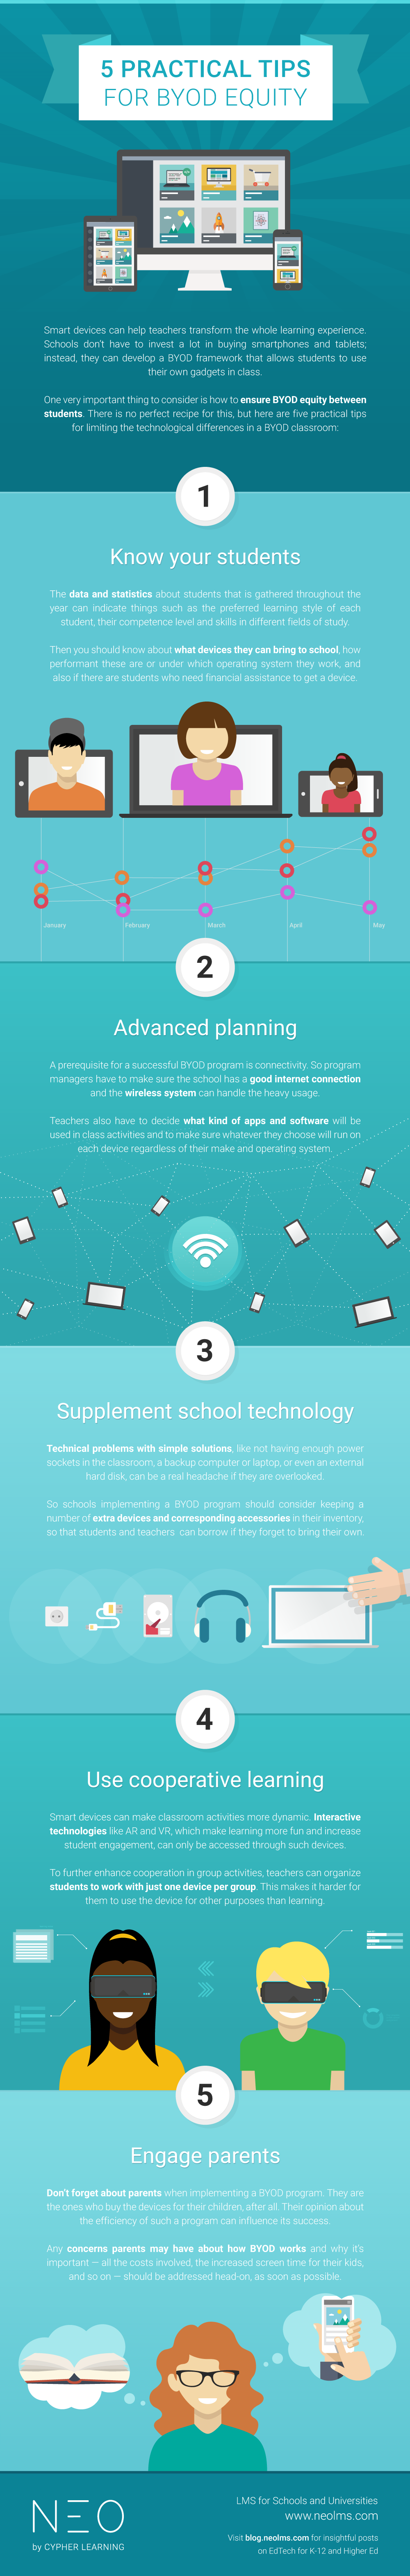 BYOD Equity infographic